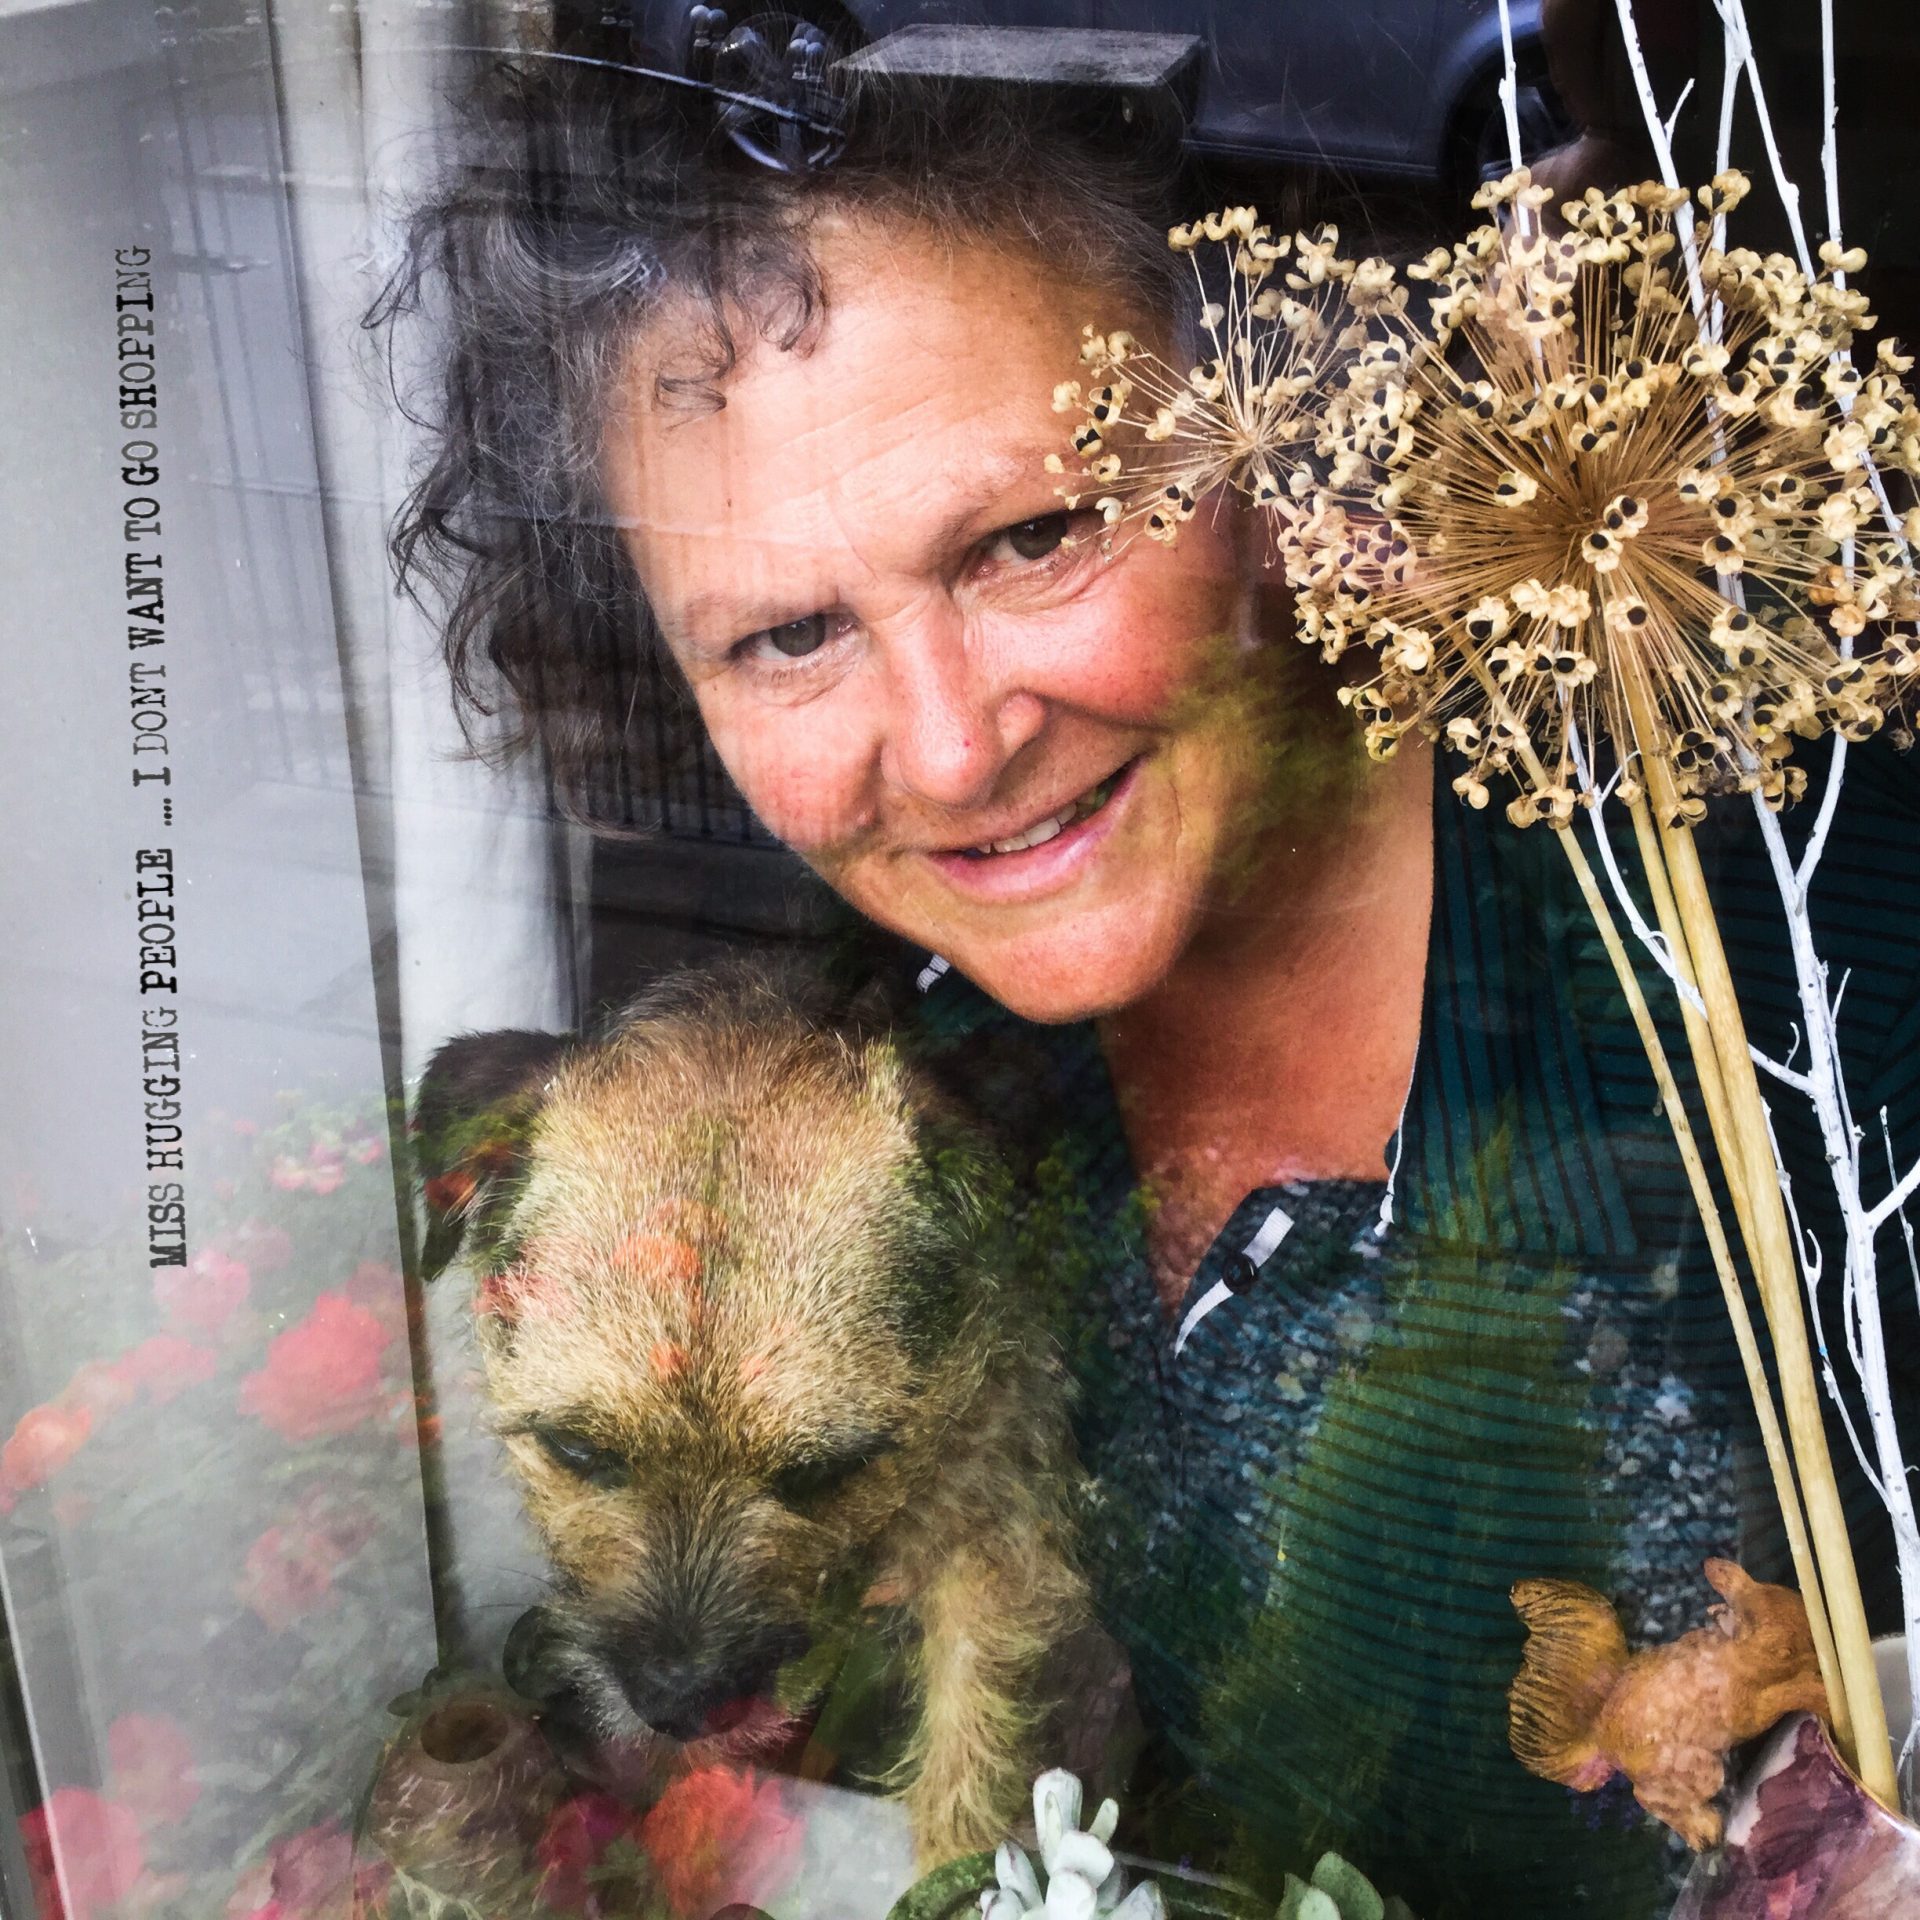 Person with dog behind a window